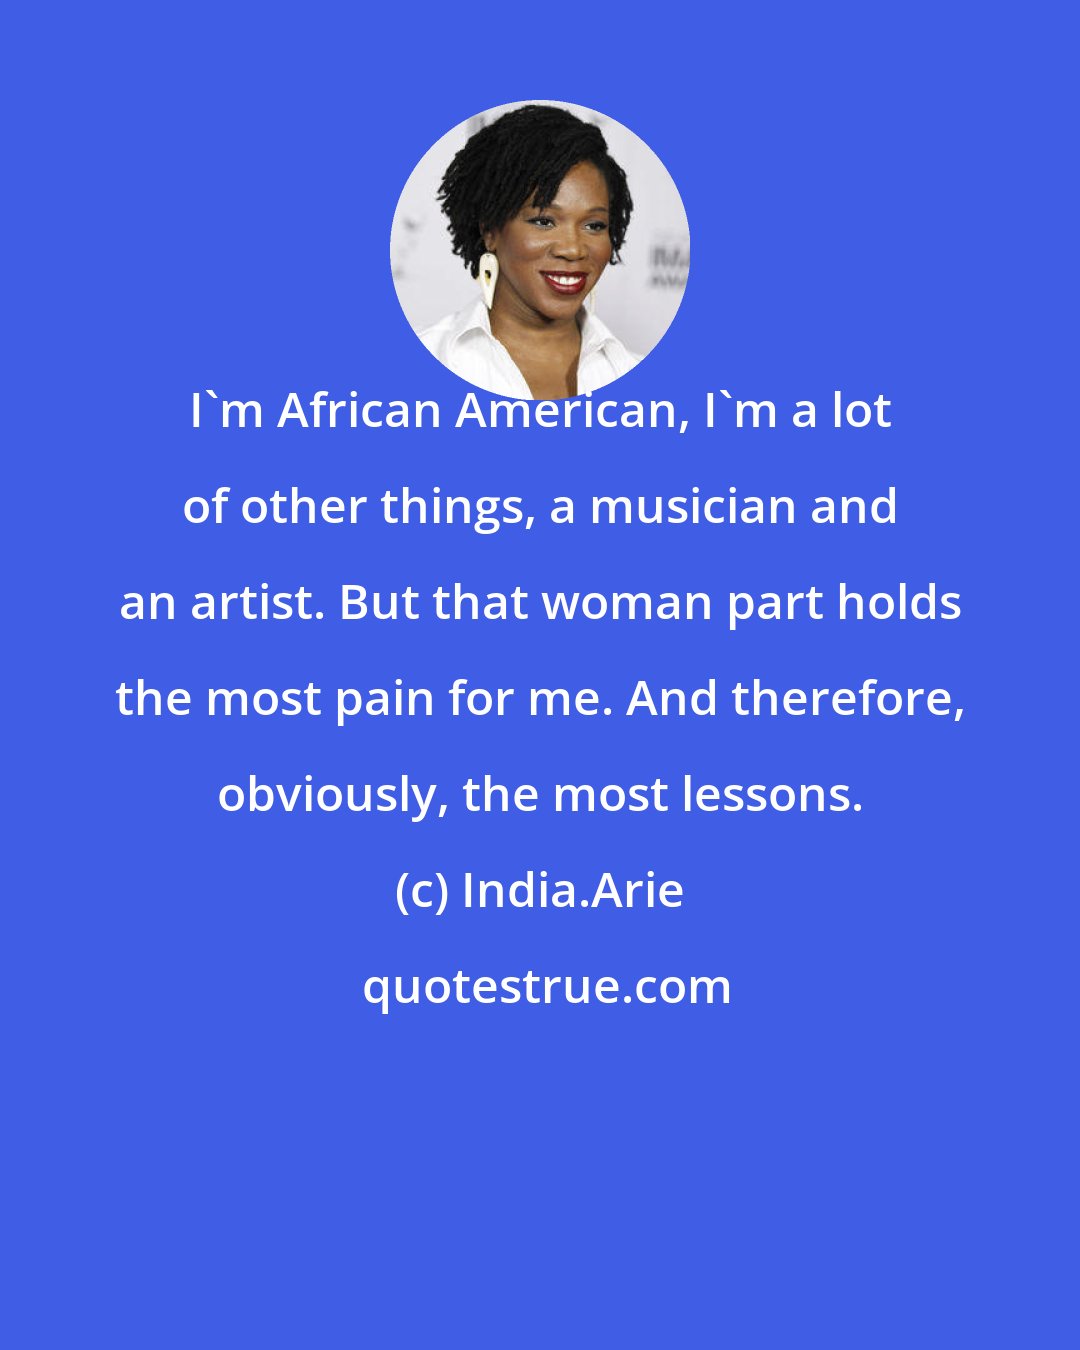 India.Arie: I'm African American, I'm a lot of other things, a musician and an artist. But that woman part holds the most pain for me. And therefore, obviously, the most lessons.